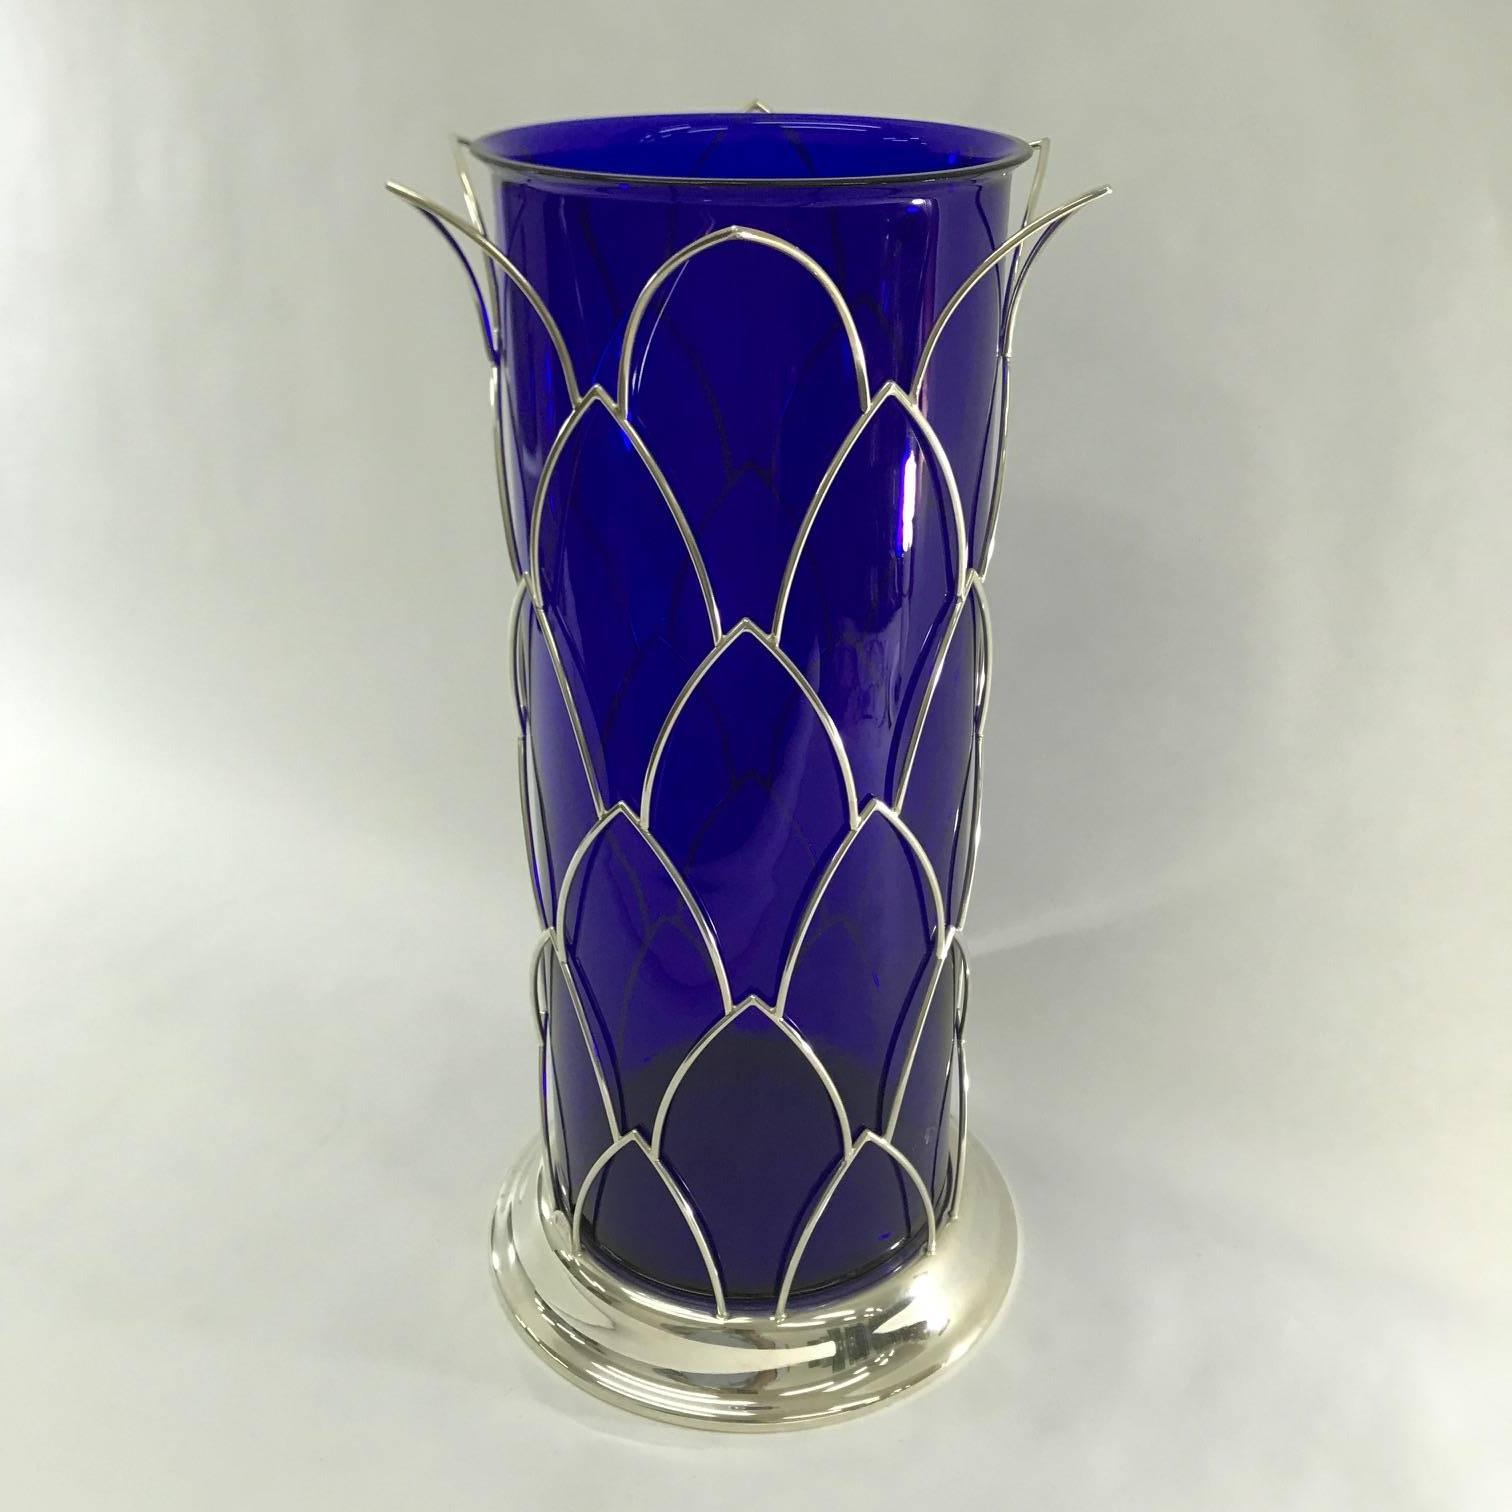 1980s Modernist Sterling Silver and Blue Murano Glass Vase by Cleto Munari 1